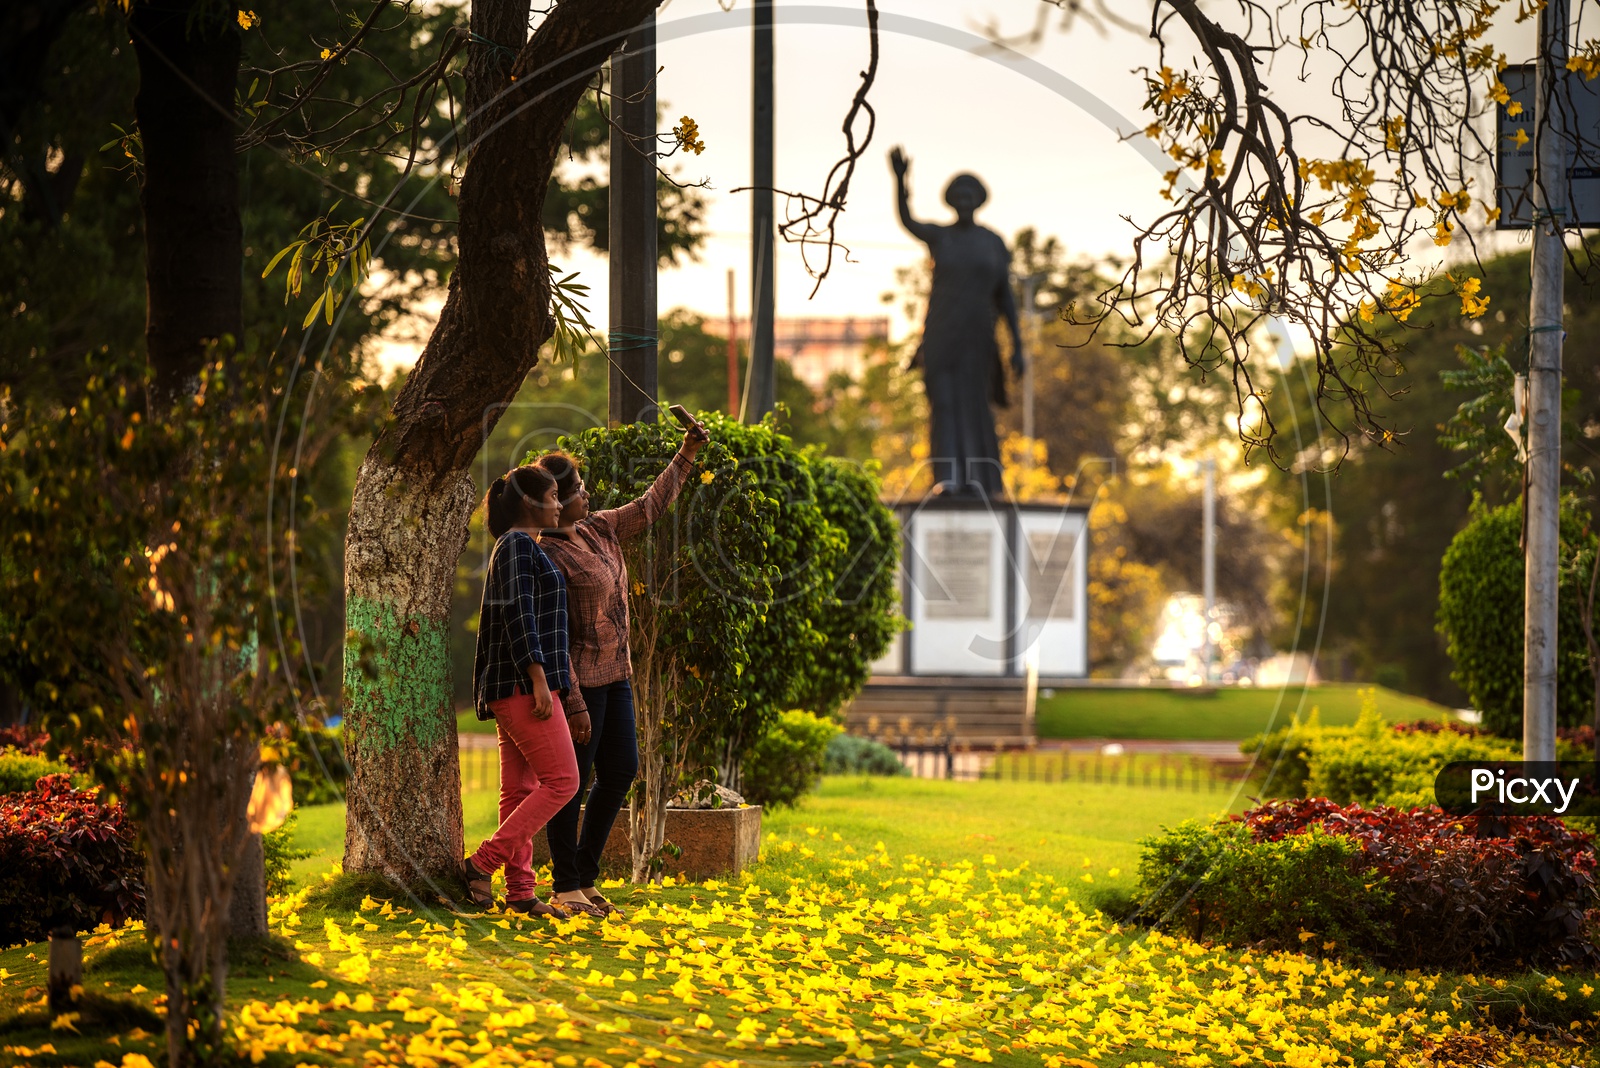 Girls take a Selfie at Indira gandhi Statue as the trees bloomed with Yellow Flowers in Necklace Road